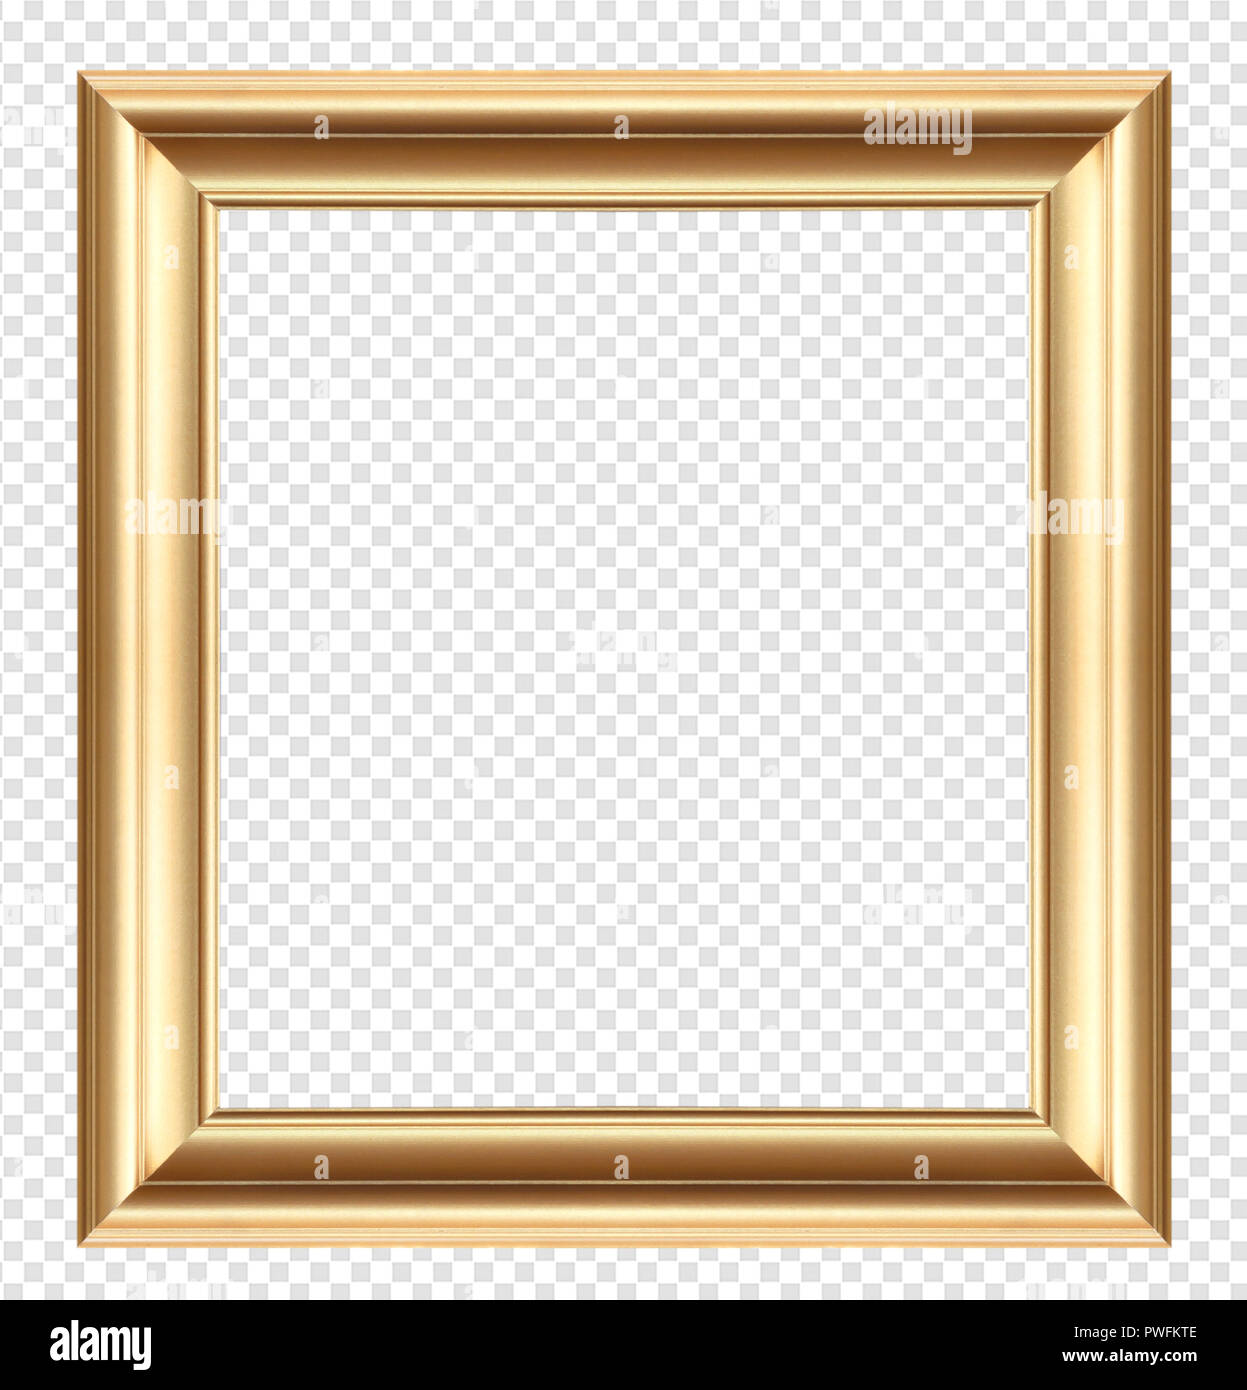 Golden wooden frame isolated on transparent background. Stock Photo